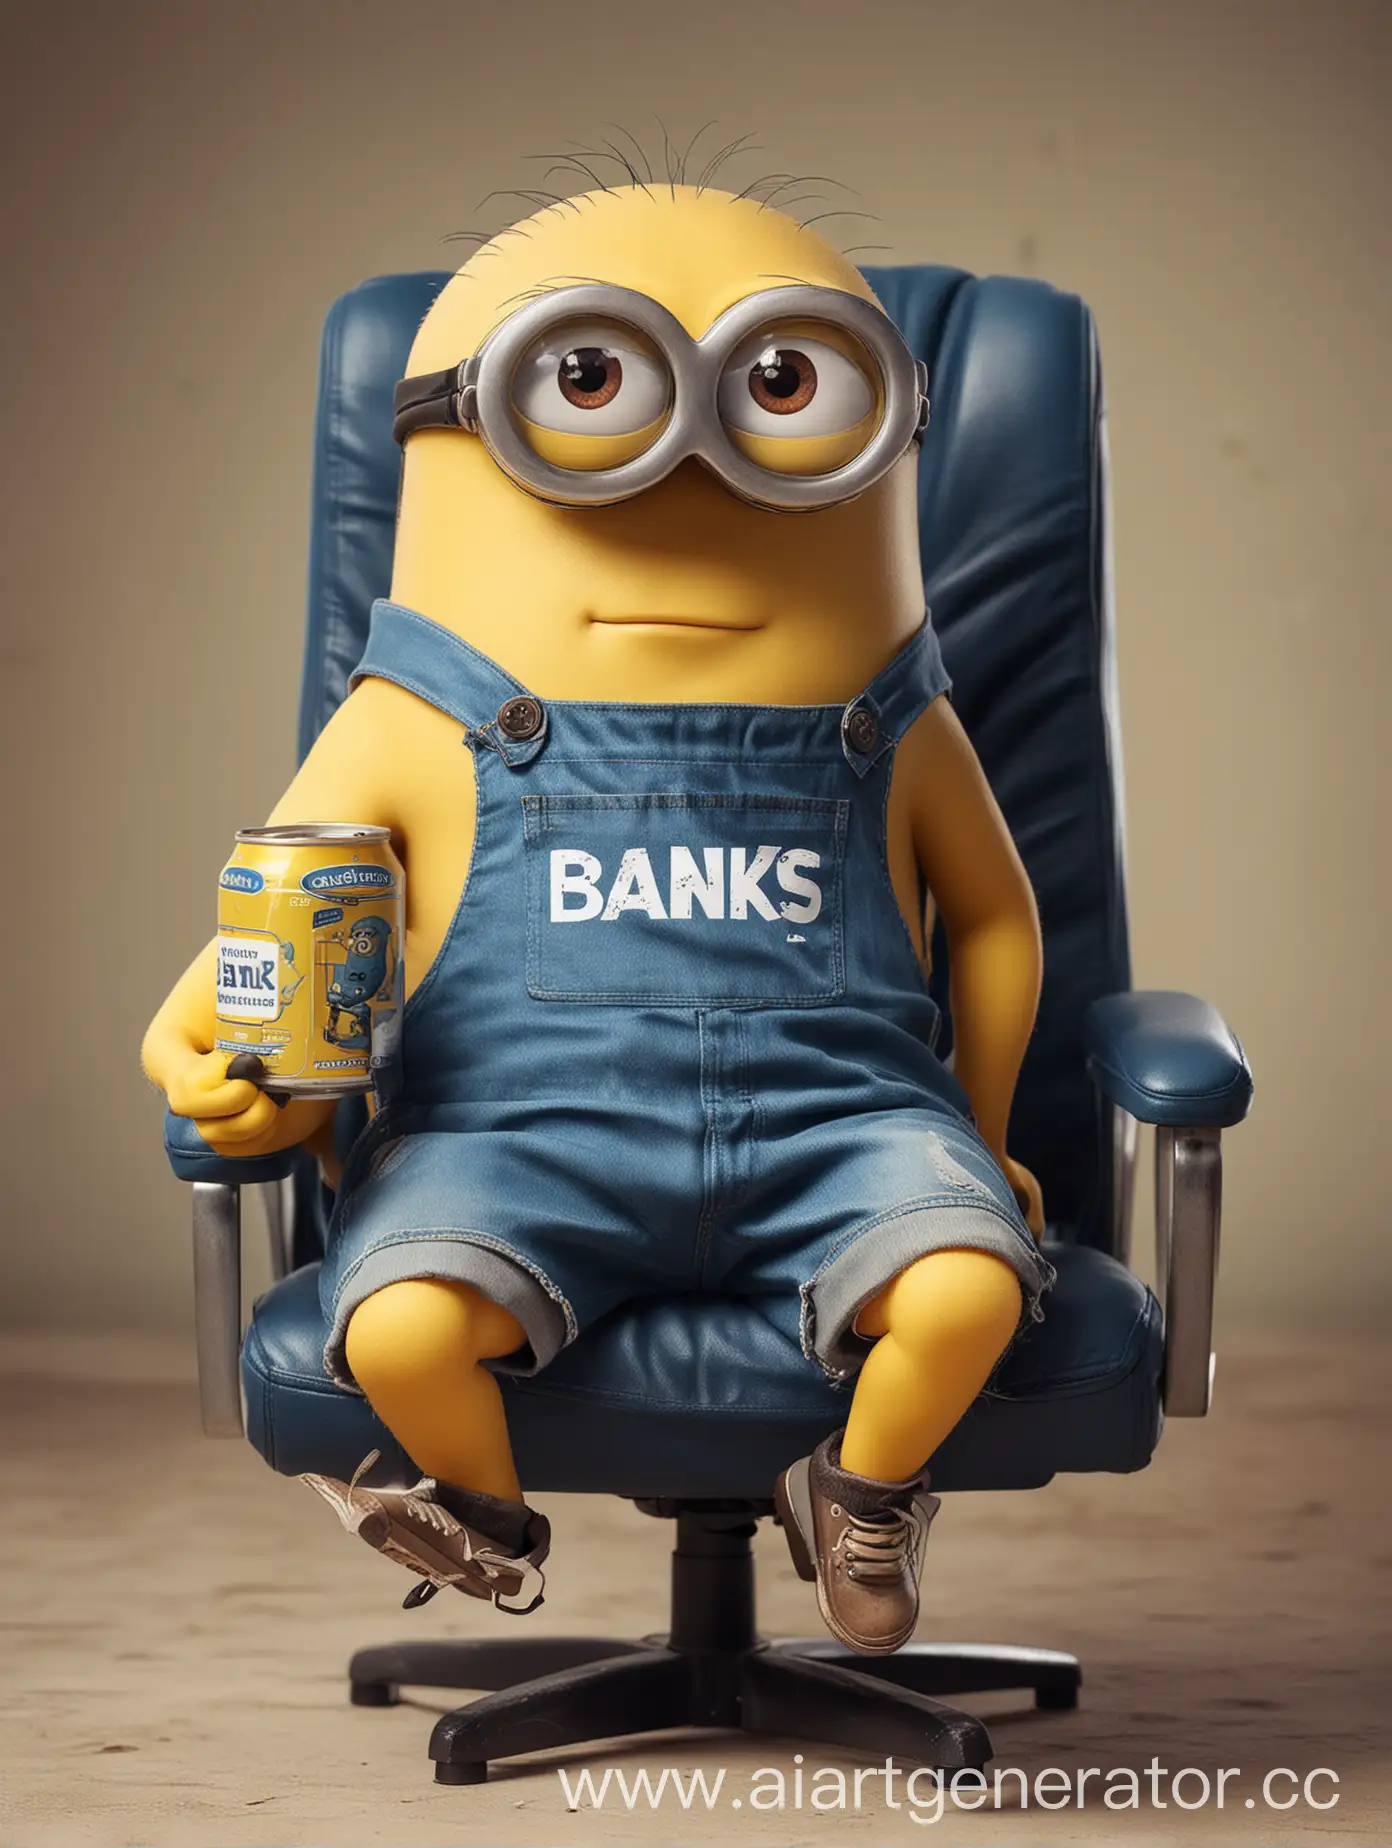 Oneeyed-Minion-Gamer-with-Cool-Glasses-and-BANKS-TShirt